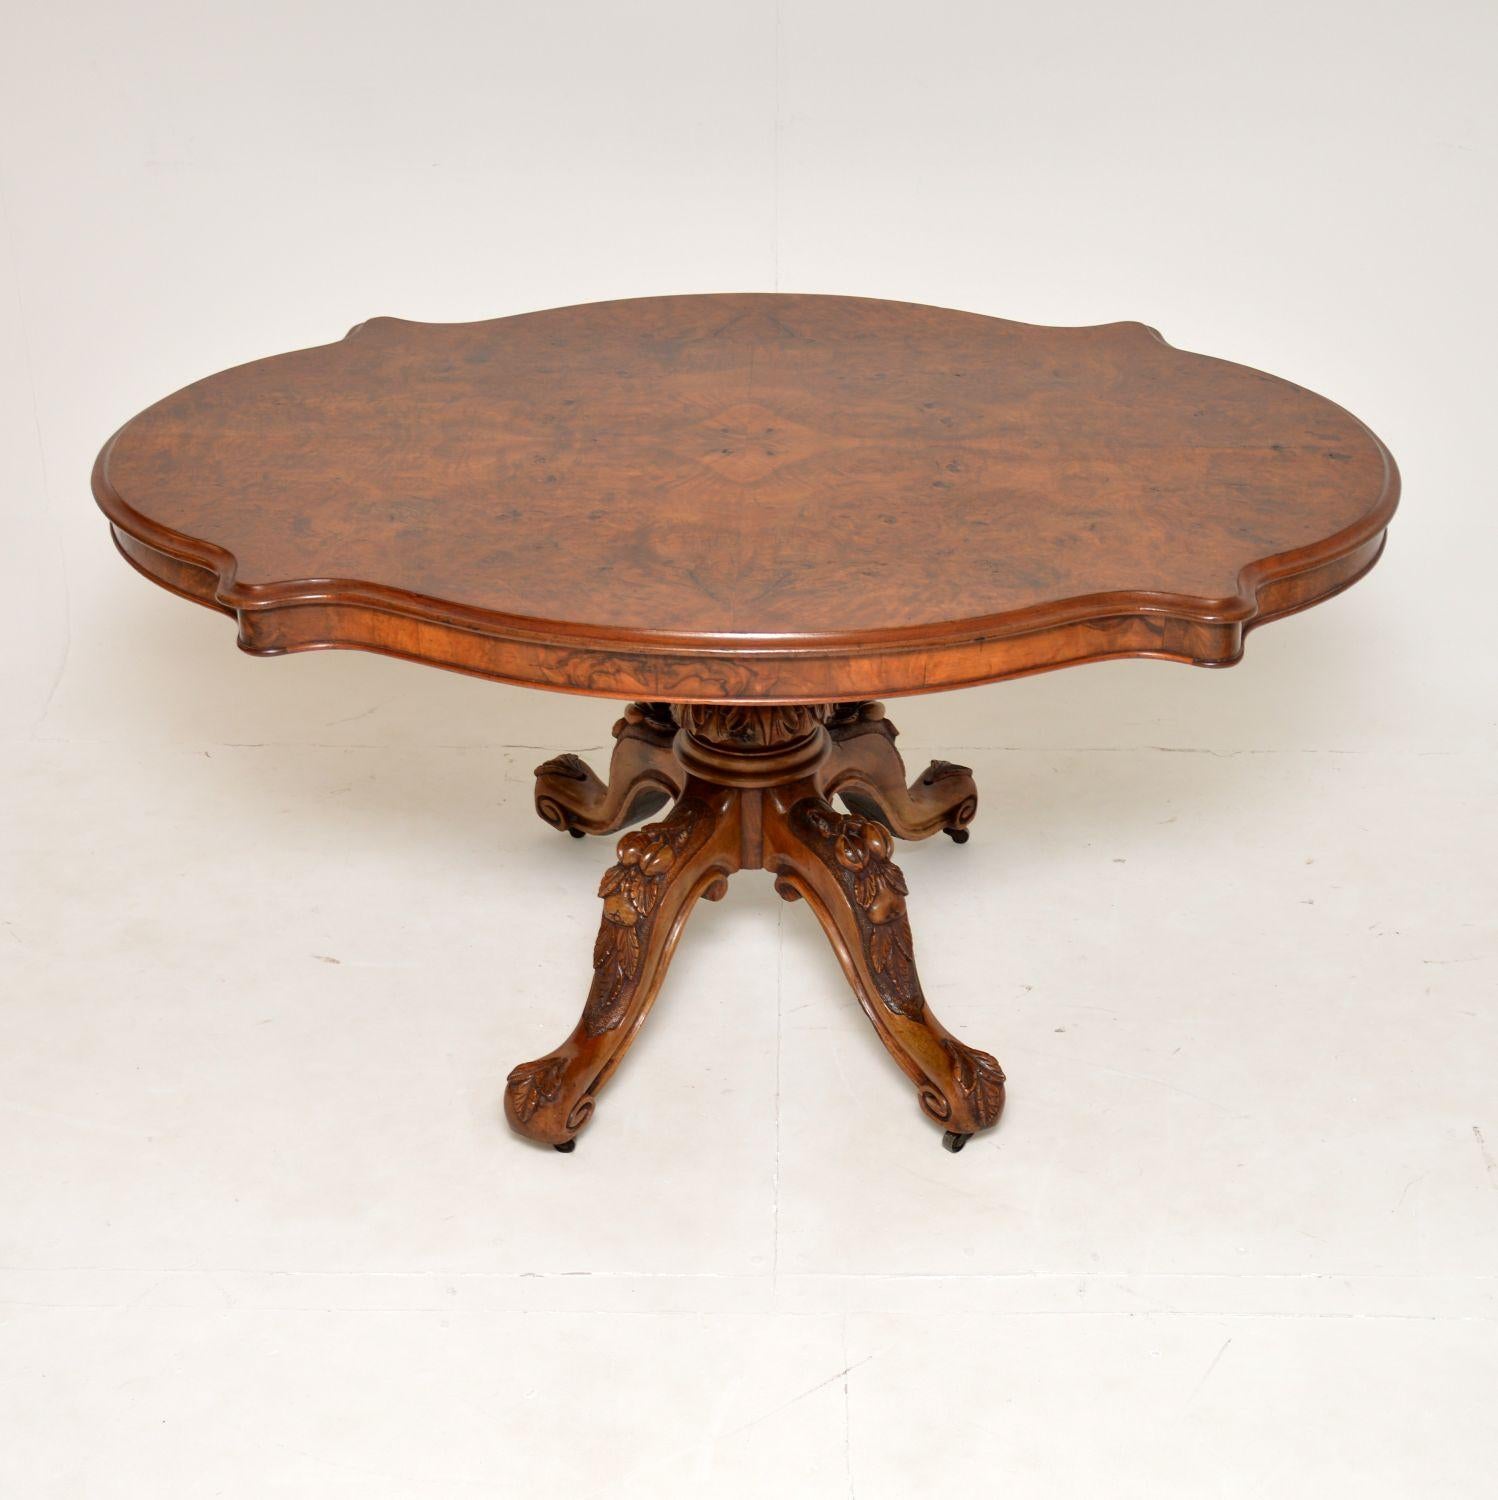 A magnificent antique Victorian burr walnut dining table, with a wonderful shape & bold carvings. This was made in England, it dates from around the 1860-1870 period.

It is of amazing quality, with a gorgeous burr walnut top with serpentine edges,